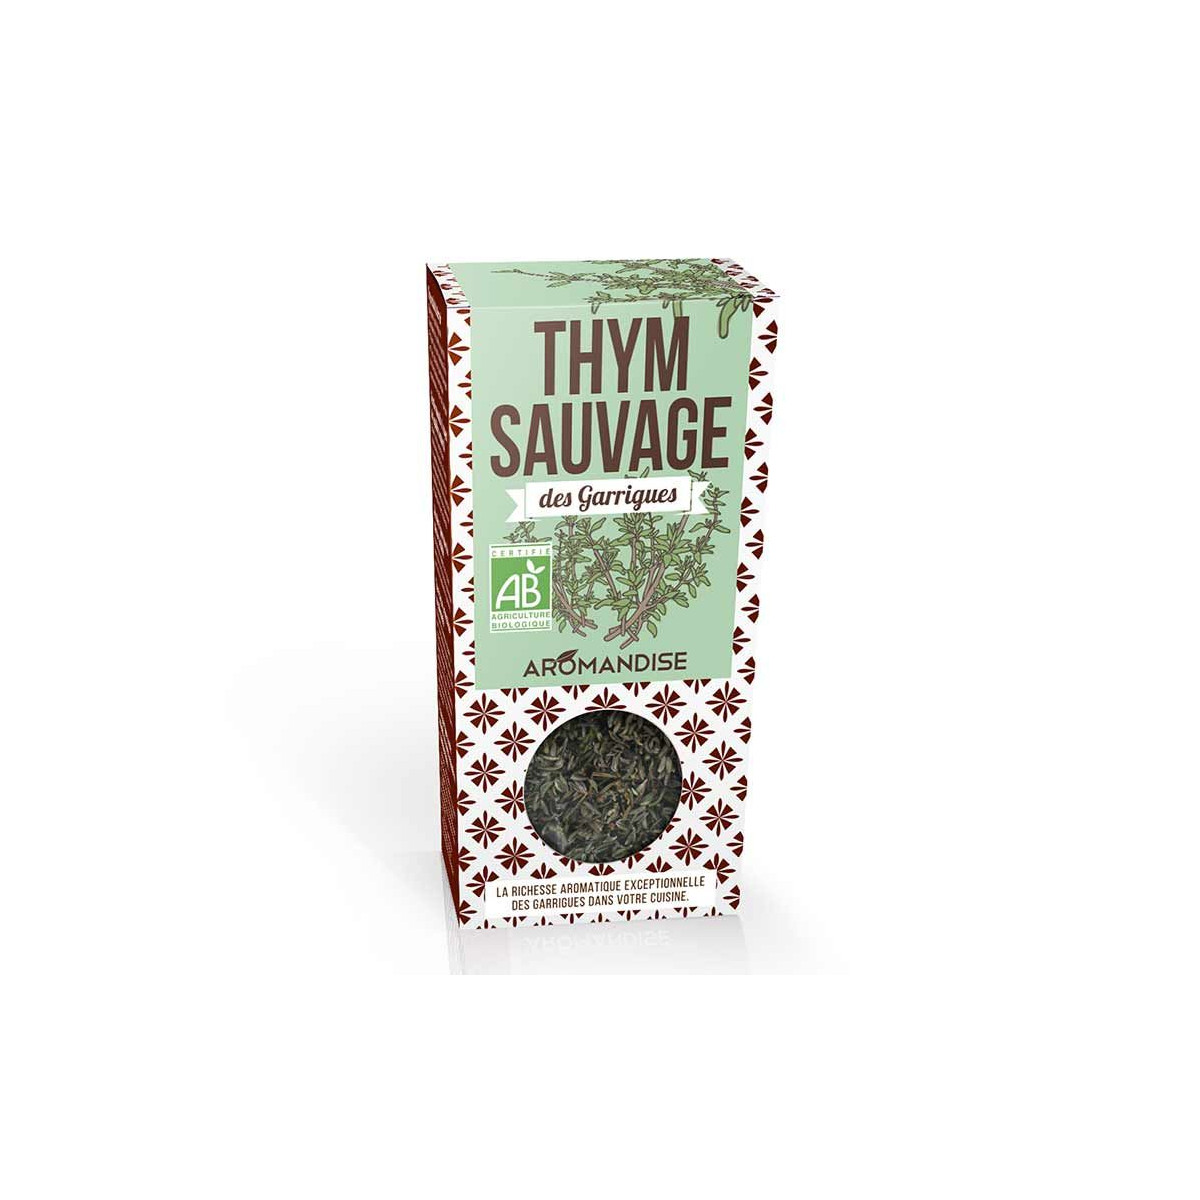 Thym sauvage des Garrigues - Aromandise - face